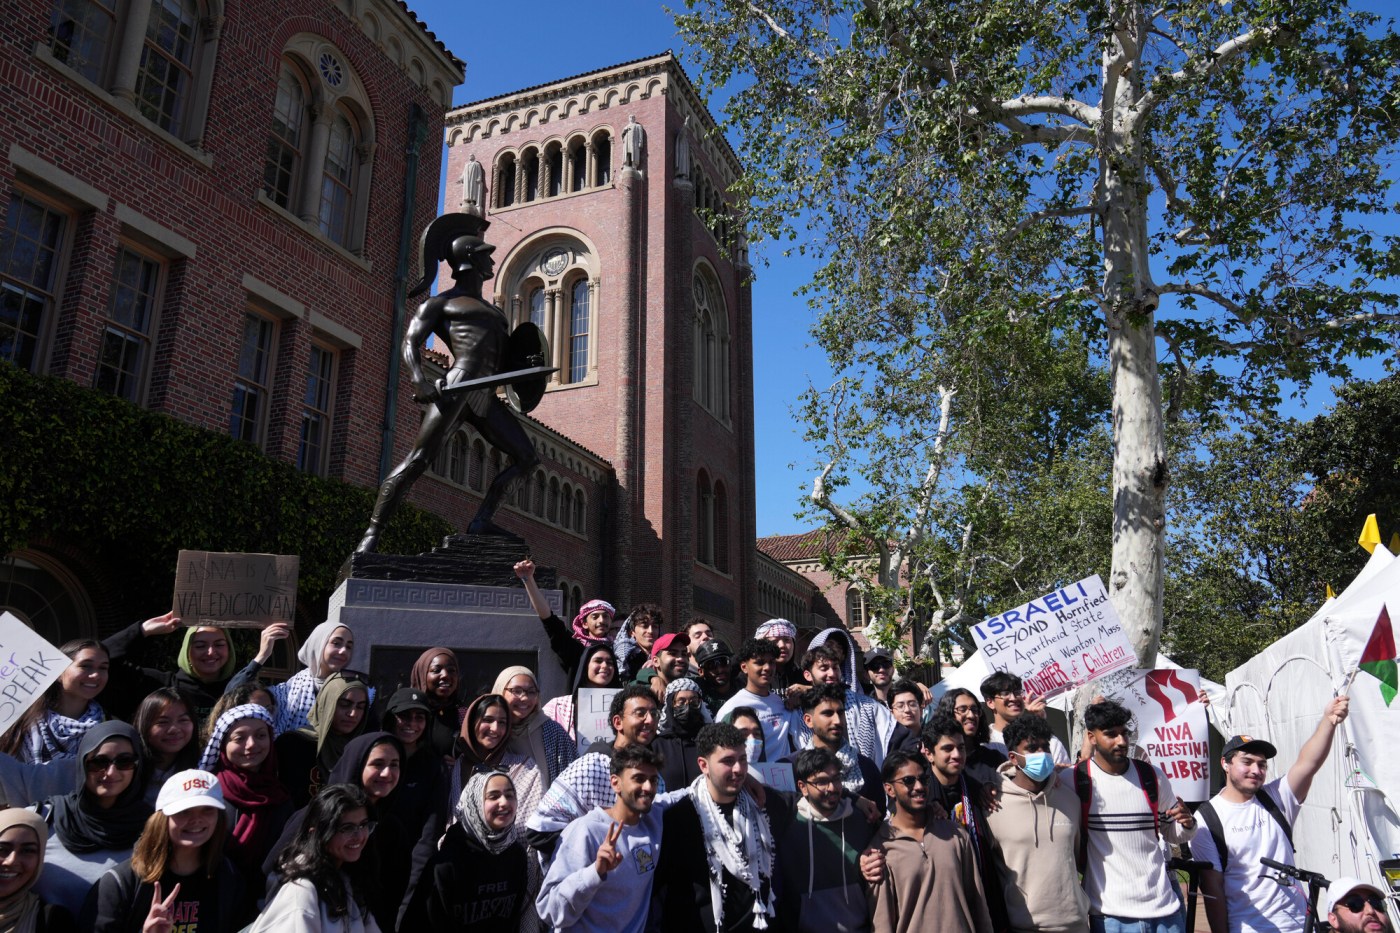 usc-cancels-all-graduation-appearances-after-dropping-muslim-speaker